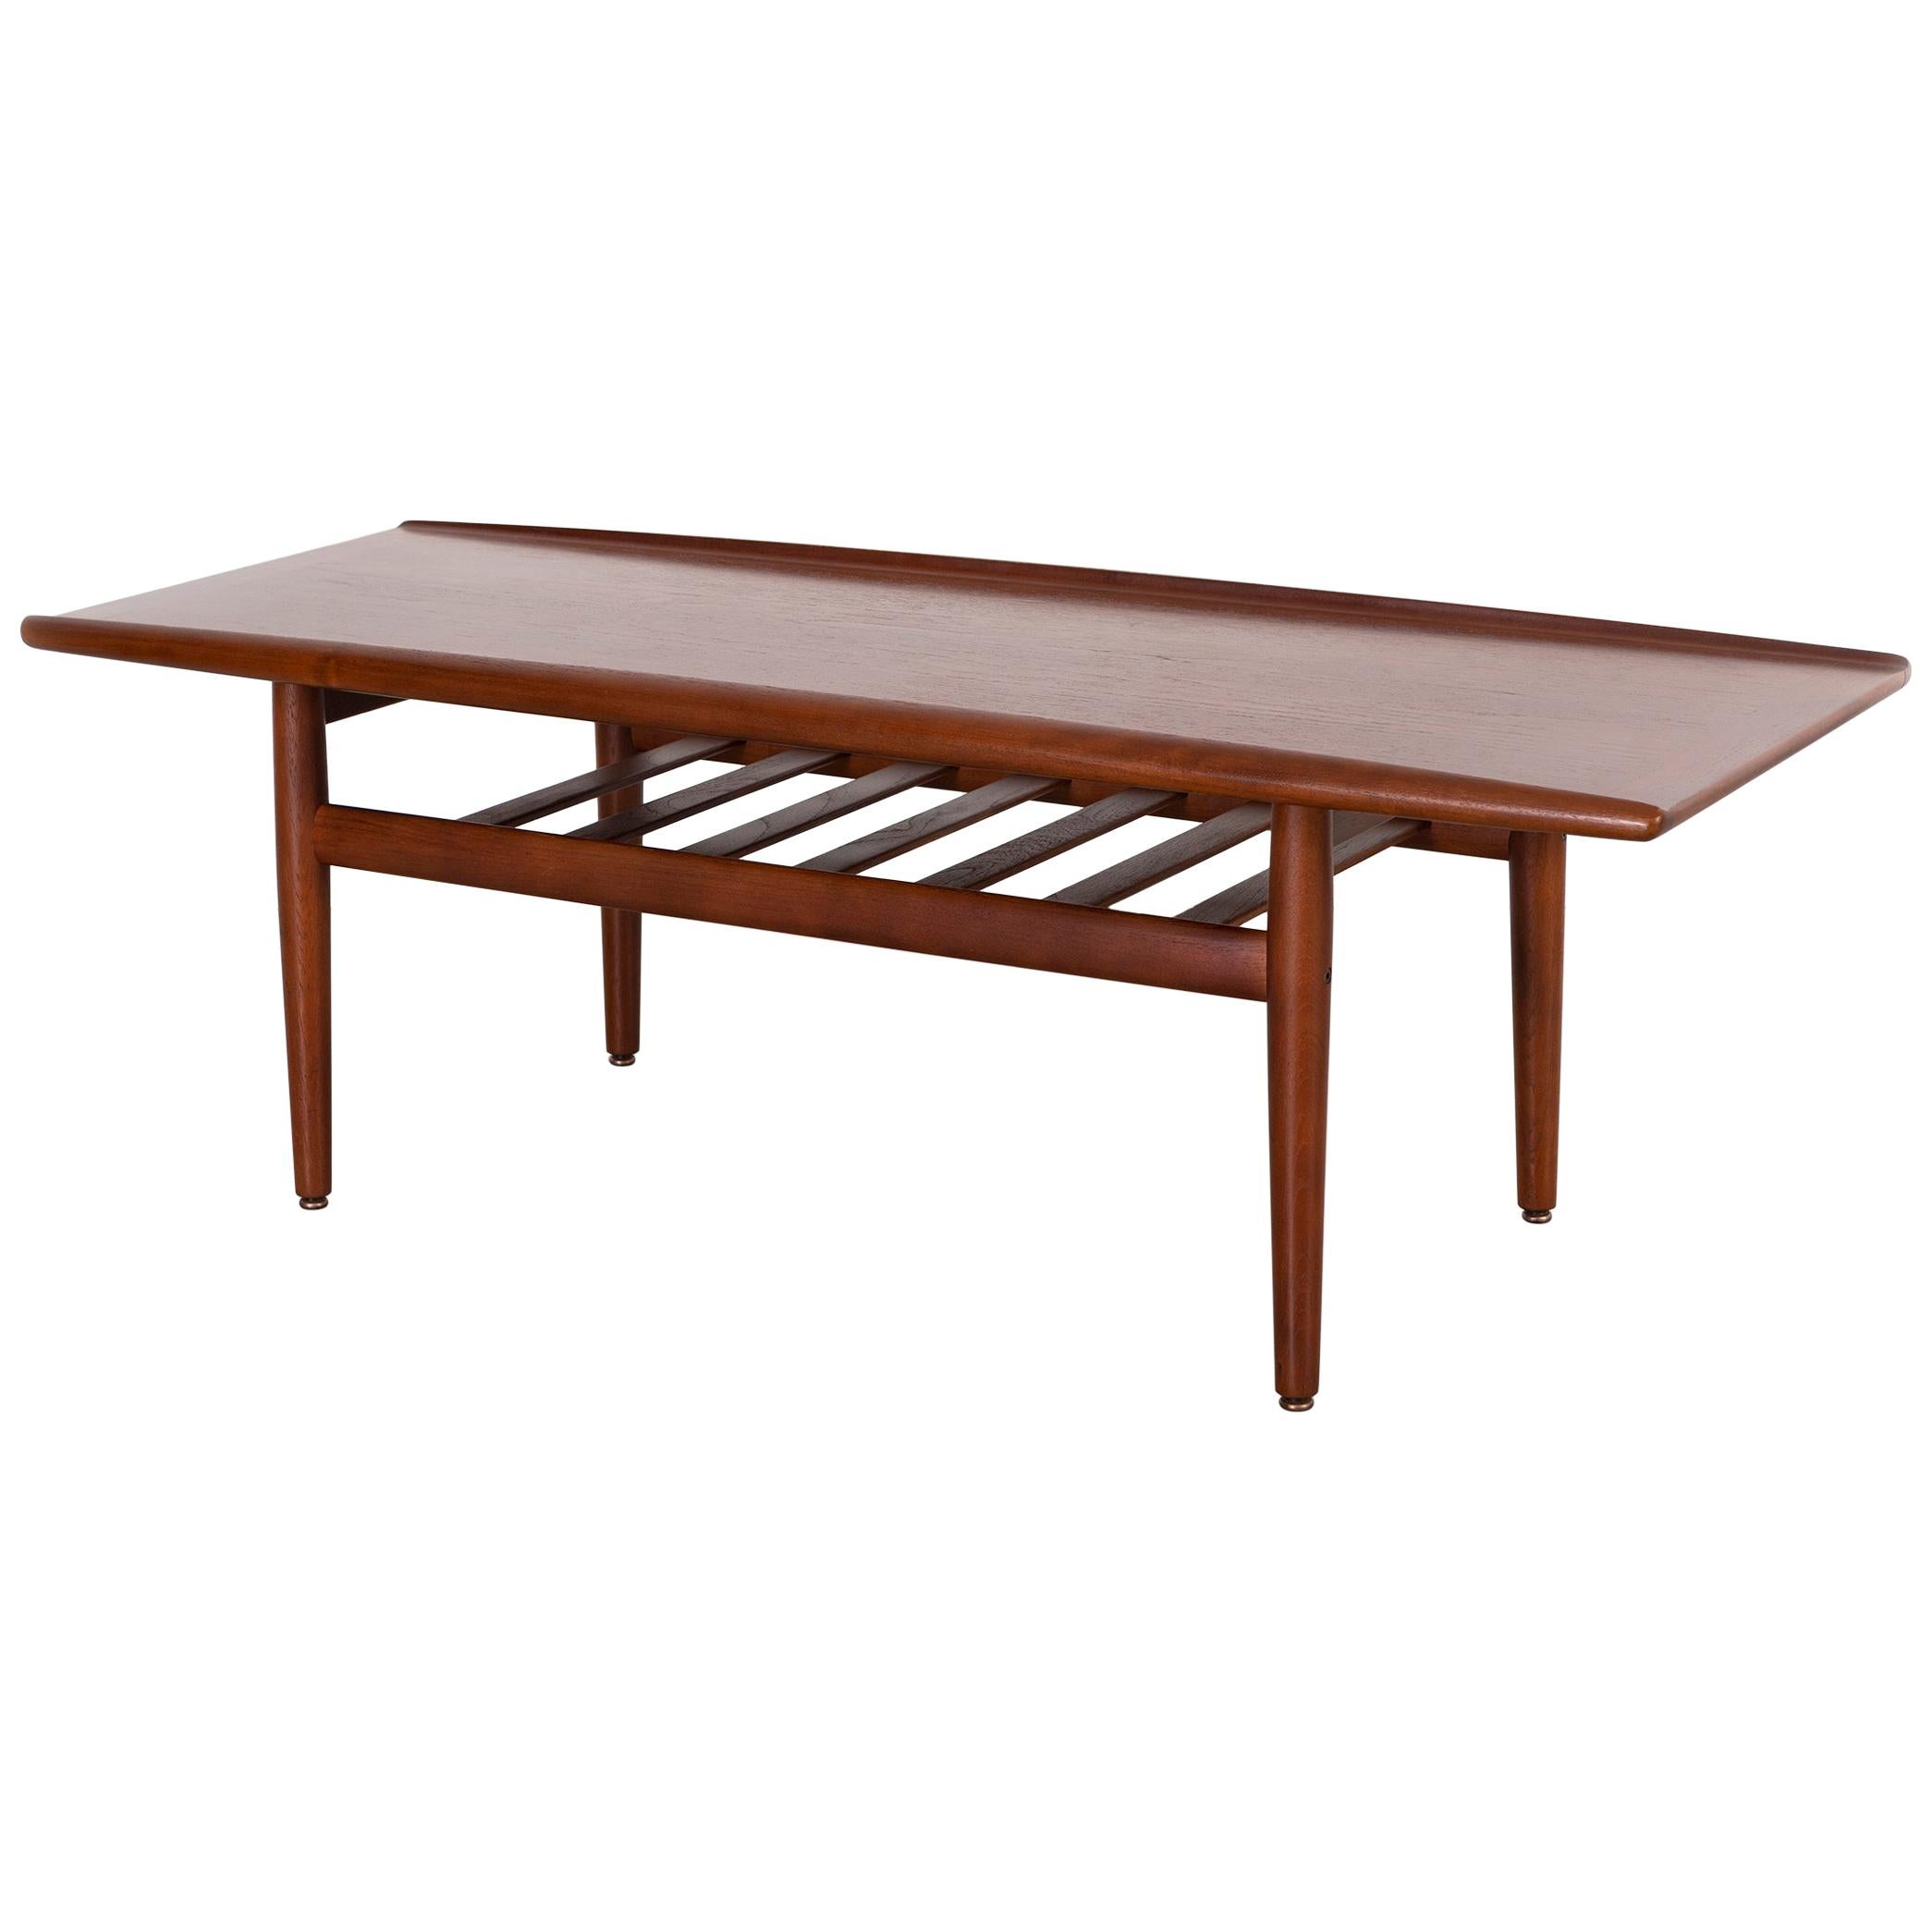 Mid-Century Modern Coffee Table by Grete Jalk for Glostrup